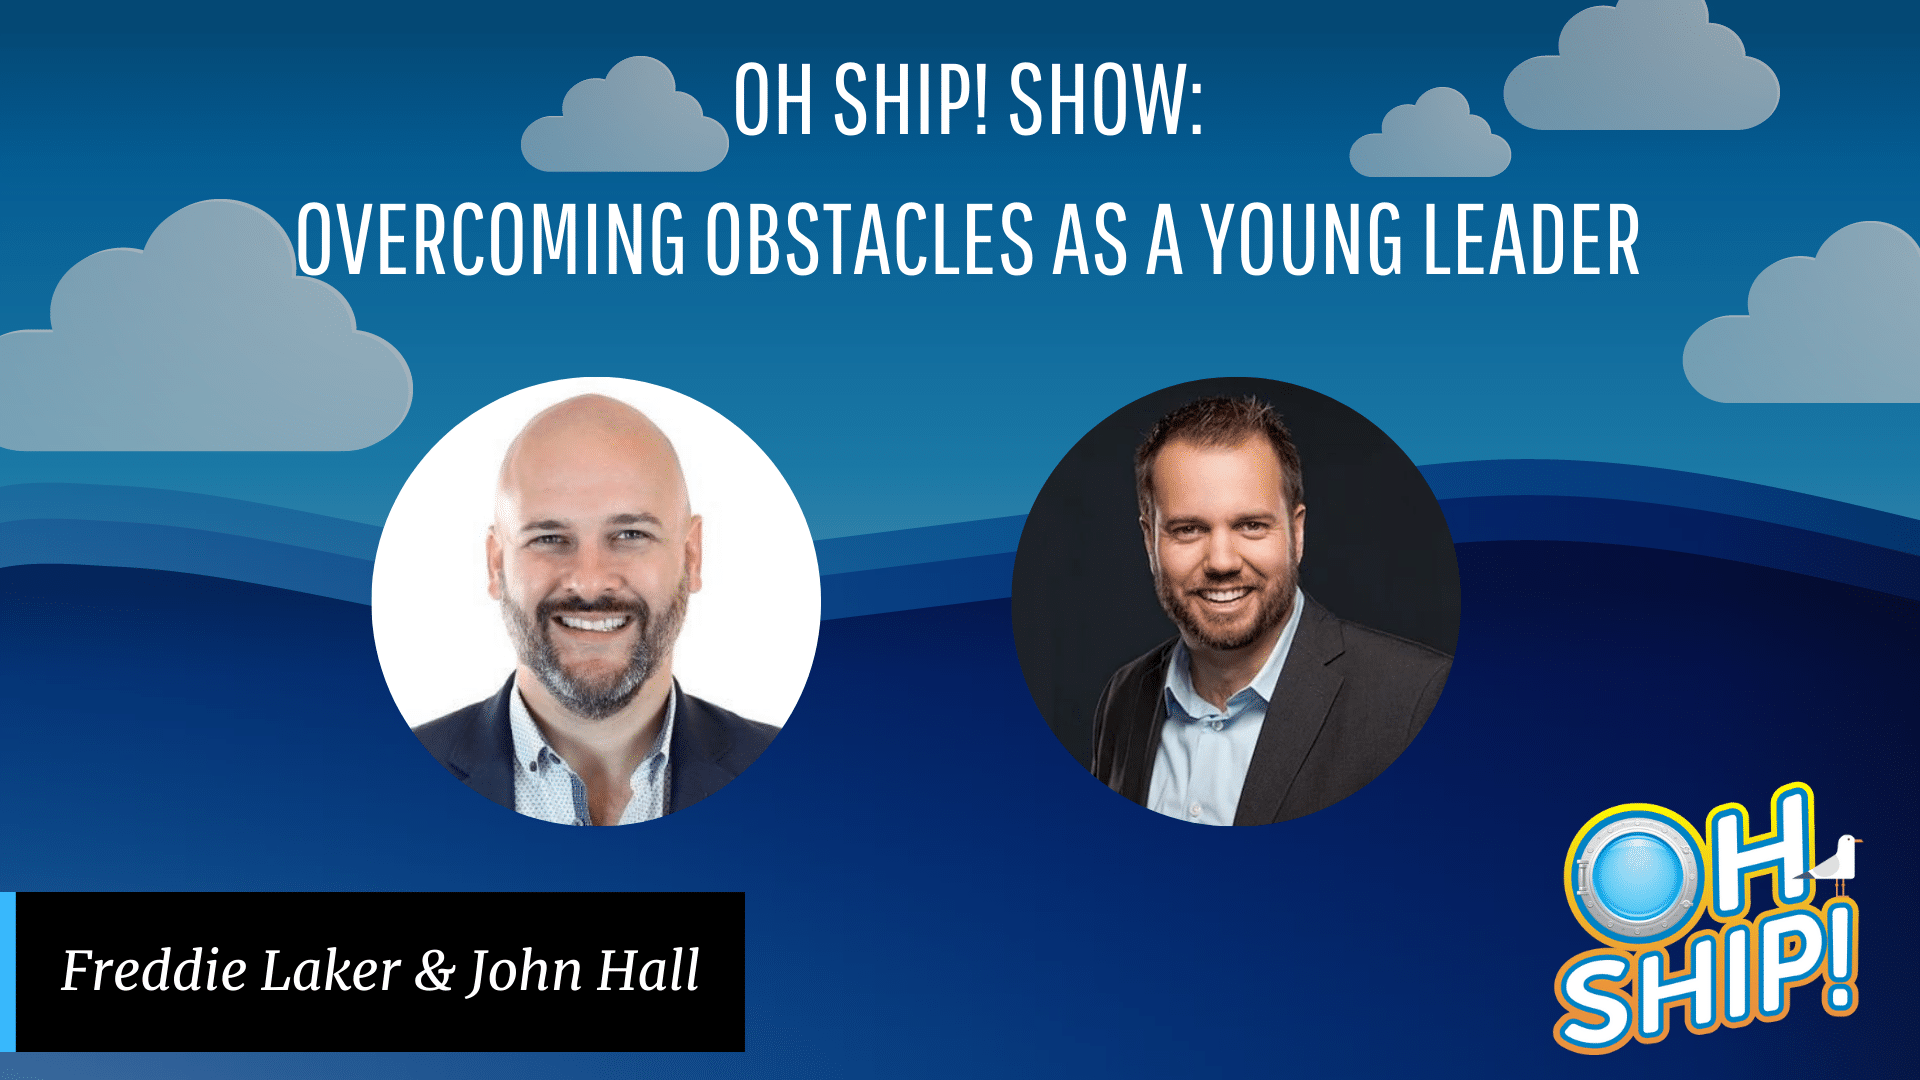 A promotional graphic for the "Oh Ship! Show" featuring a blue background with clouds. The text reads "OH SHIP! SHOW: OVERCOMING OBSTACLES AS A YOUNG LEADER." There are photos of two smiling men, labeled "Freddie Laker" and "John Hall.